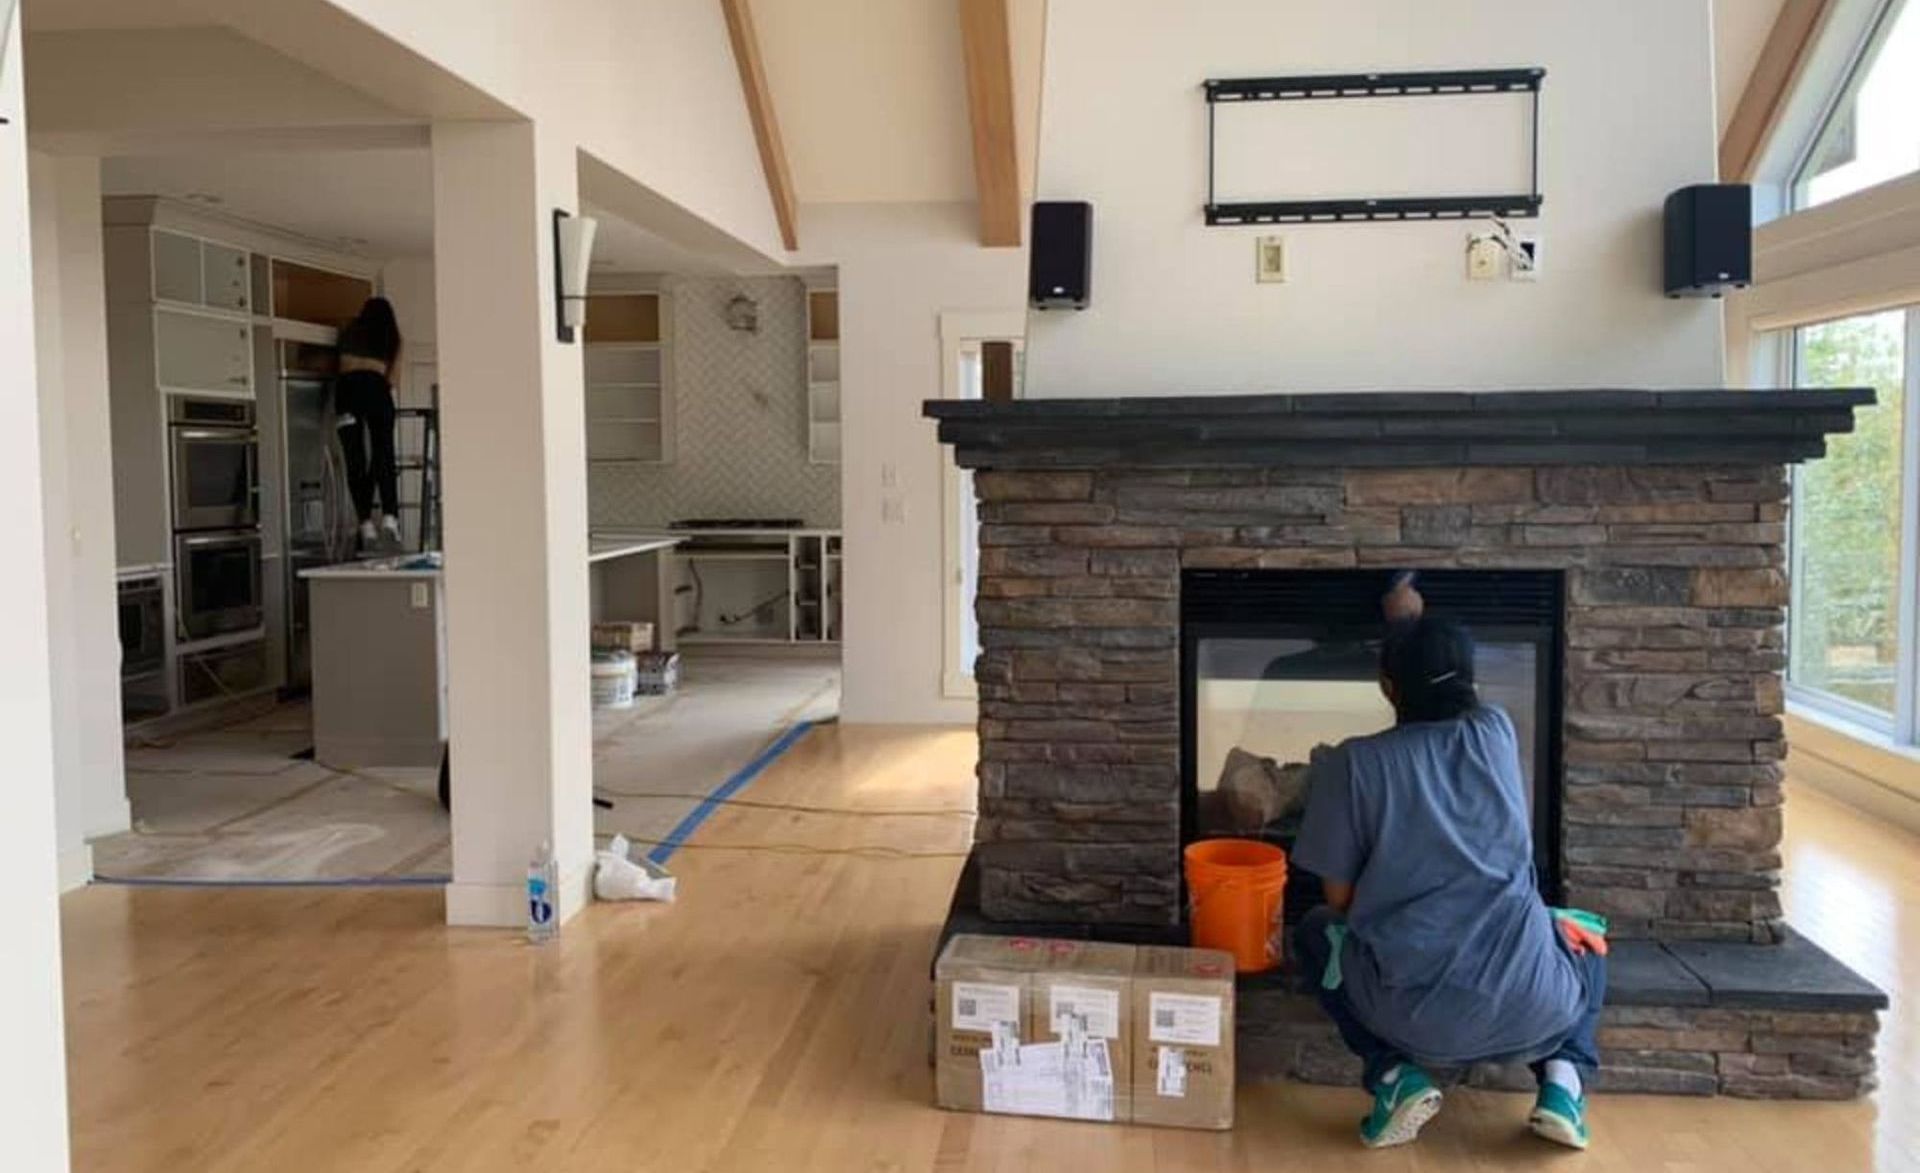 A man is cleaning a fireplace in a living room.